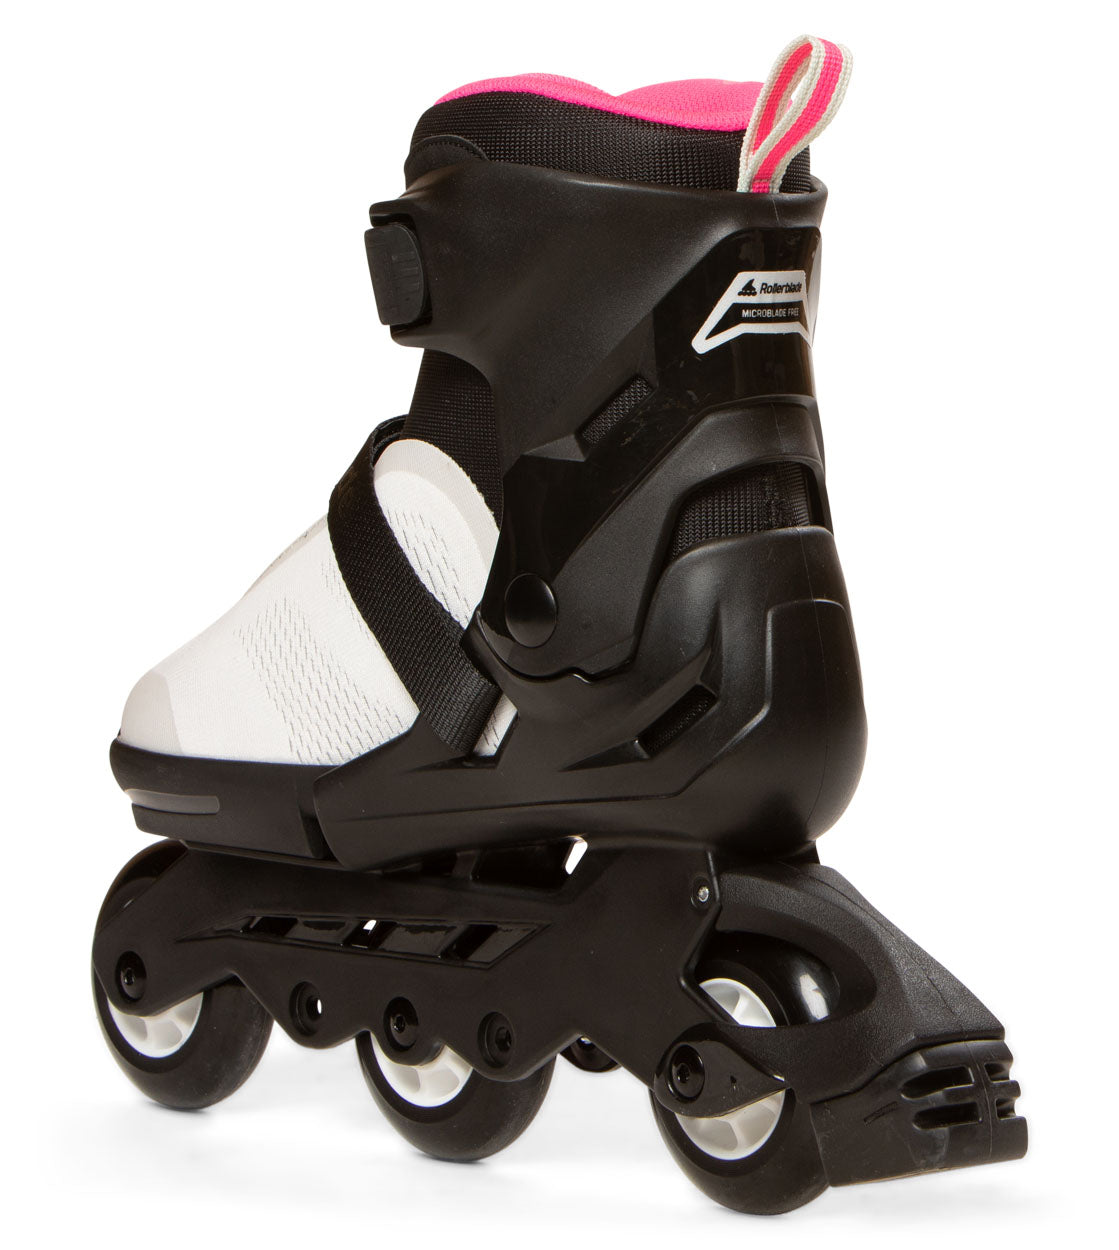 Rollerblade Kids Microblade Free 3WD